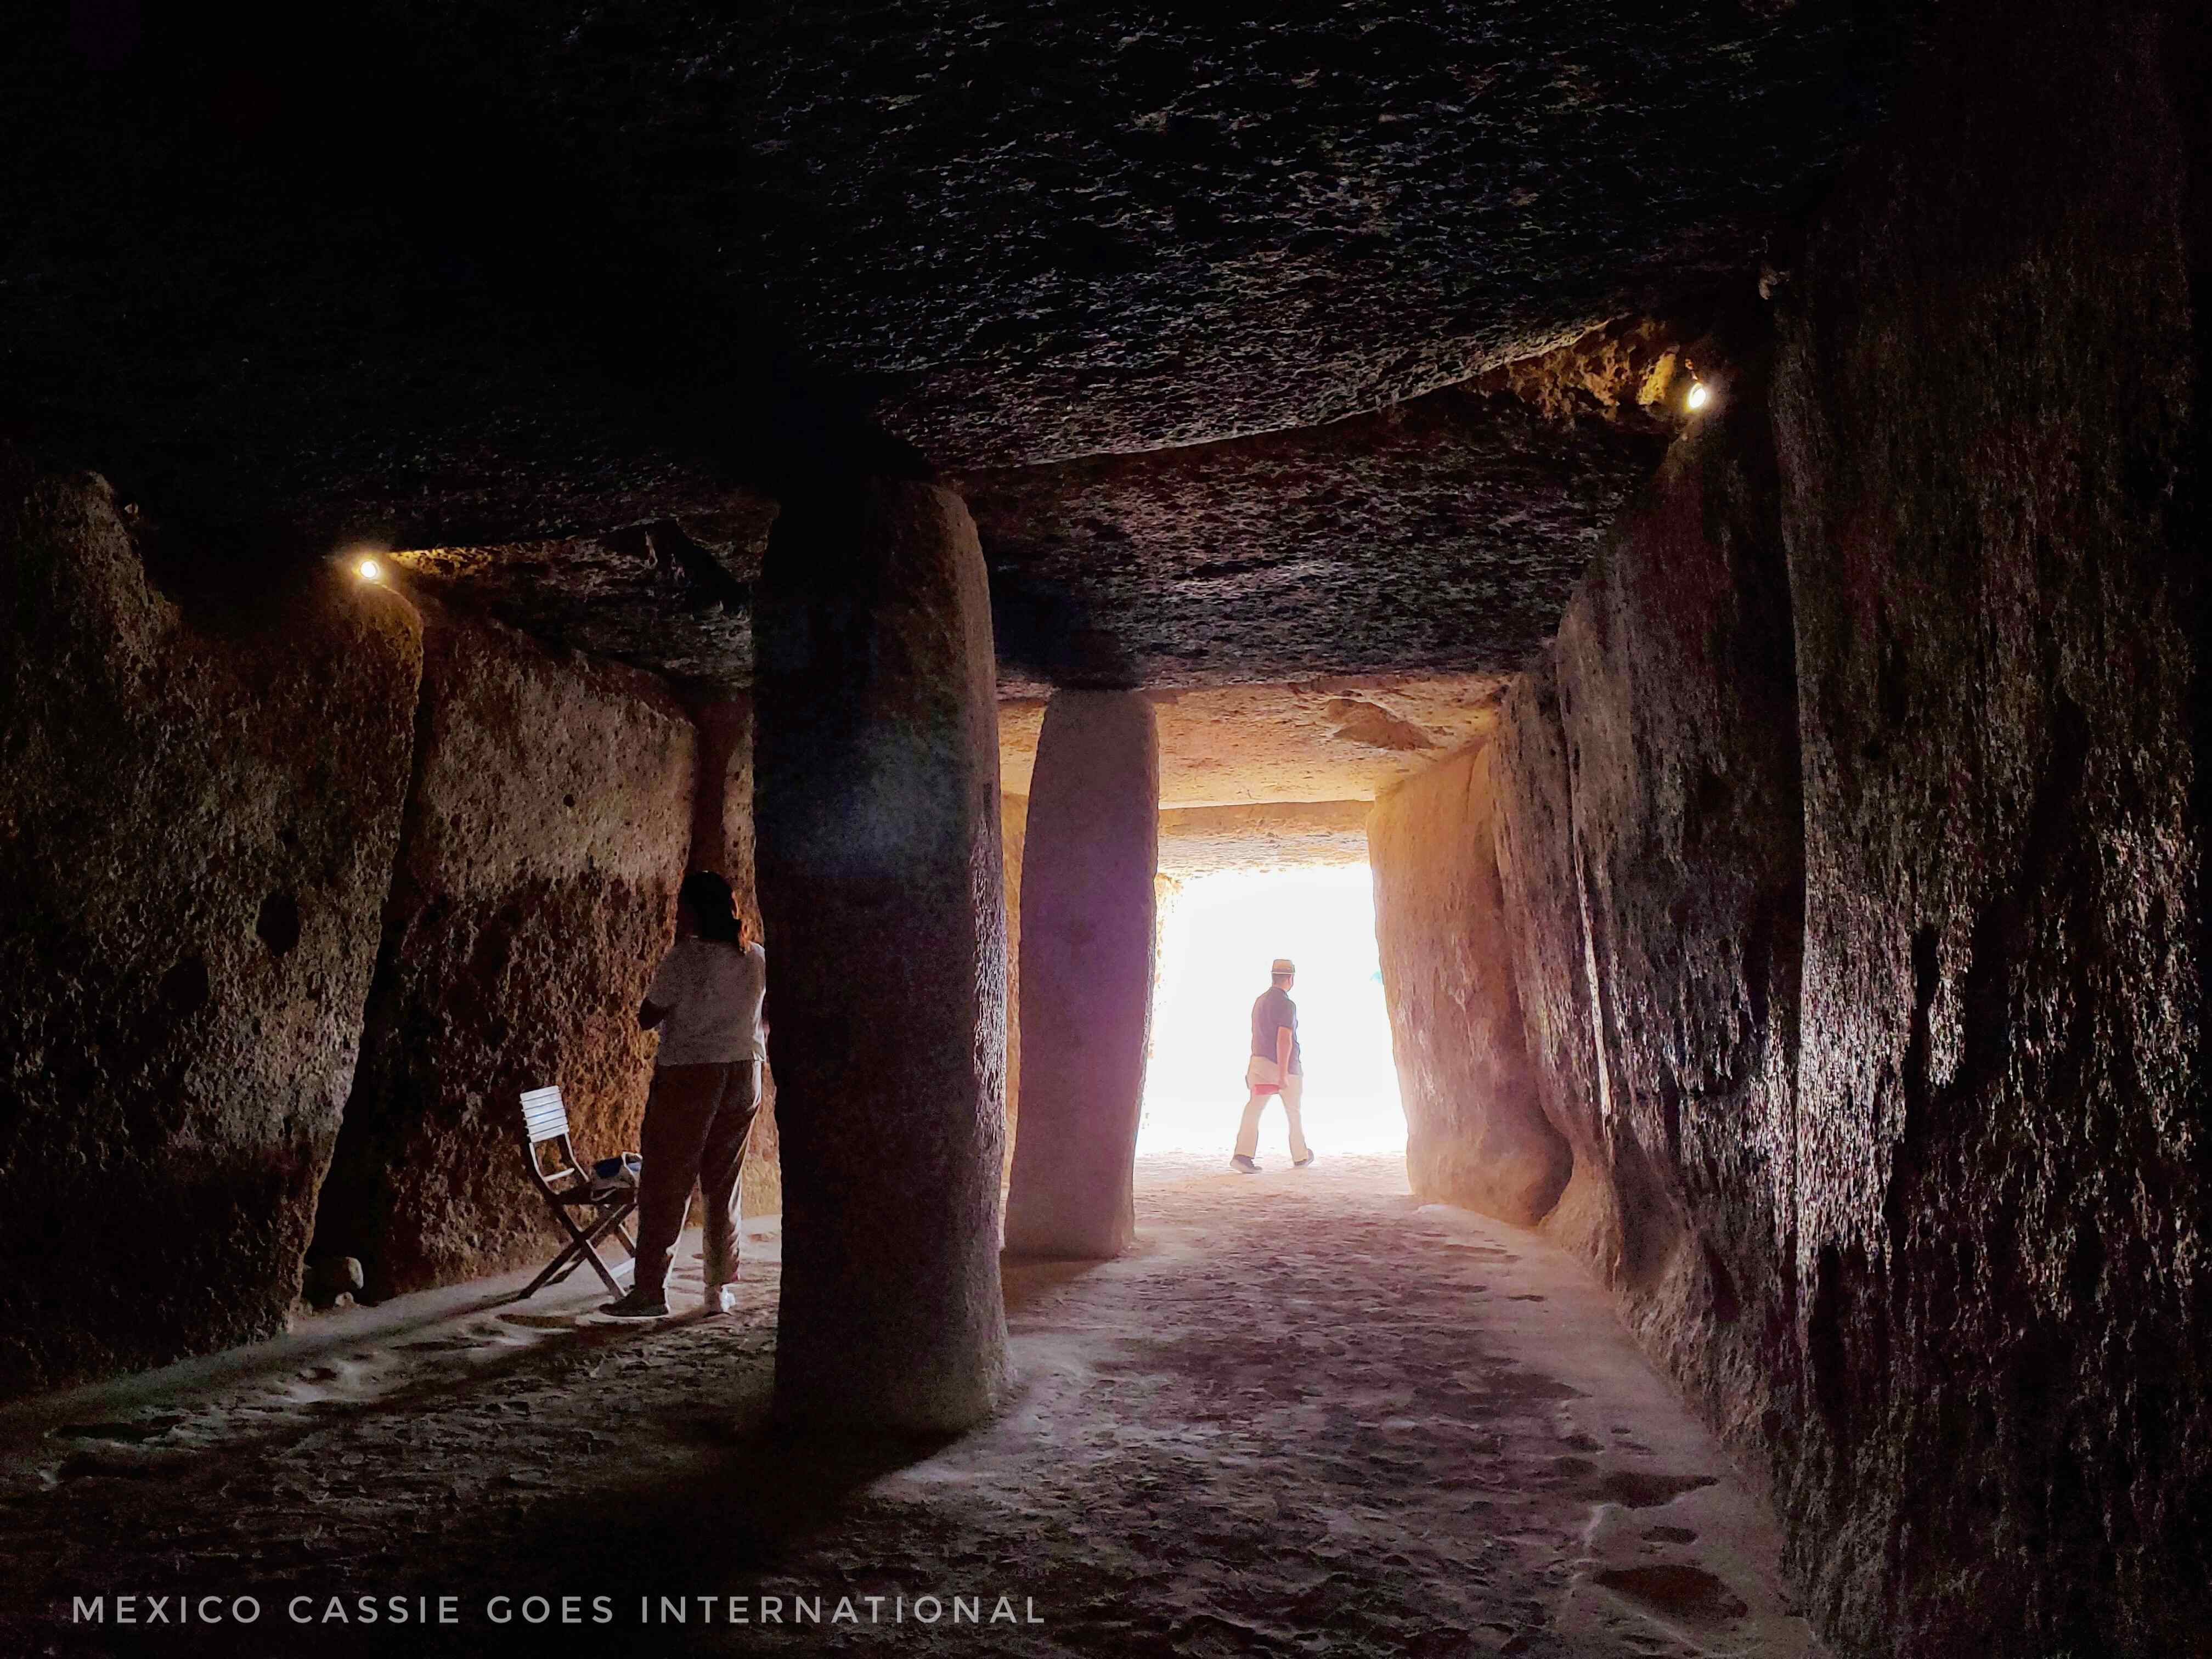 view from inside of a dolmen. two standing rocks supporting giant slabs of roof